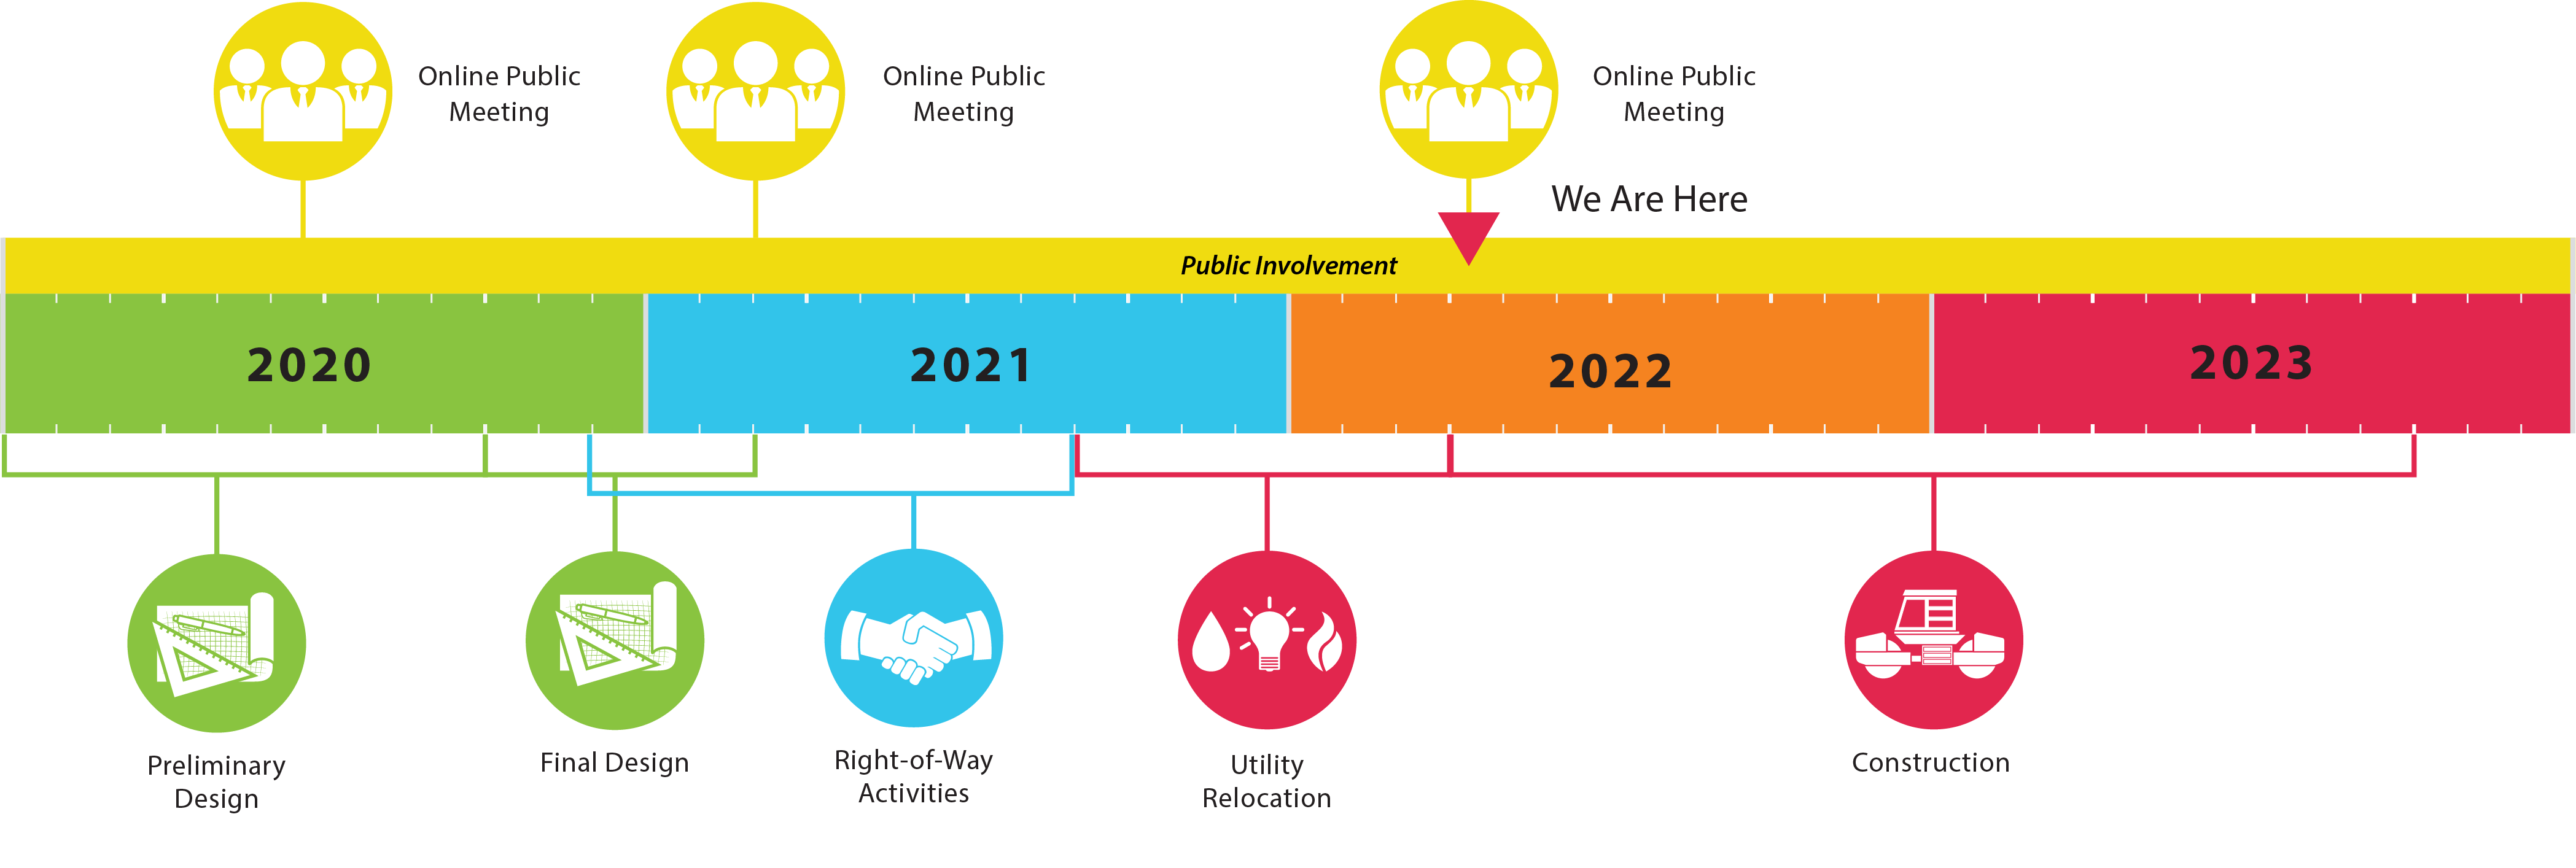 A timeline that depicts key project milestones for the years of 2020, 2021, and 2022.